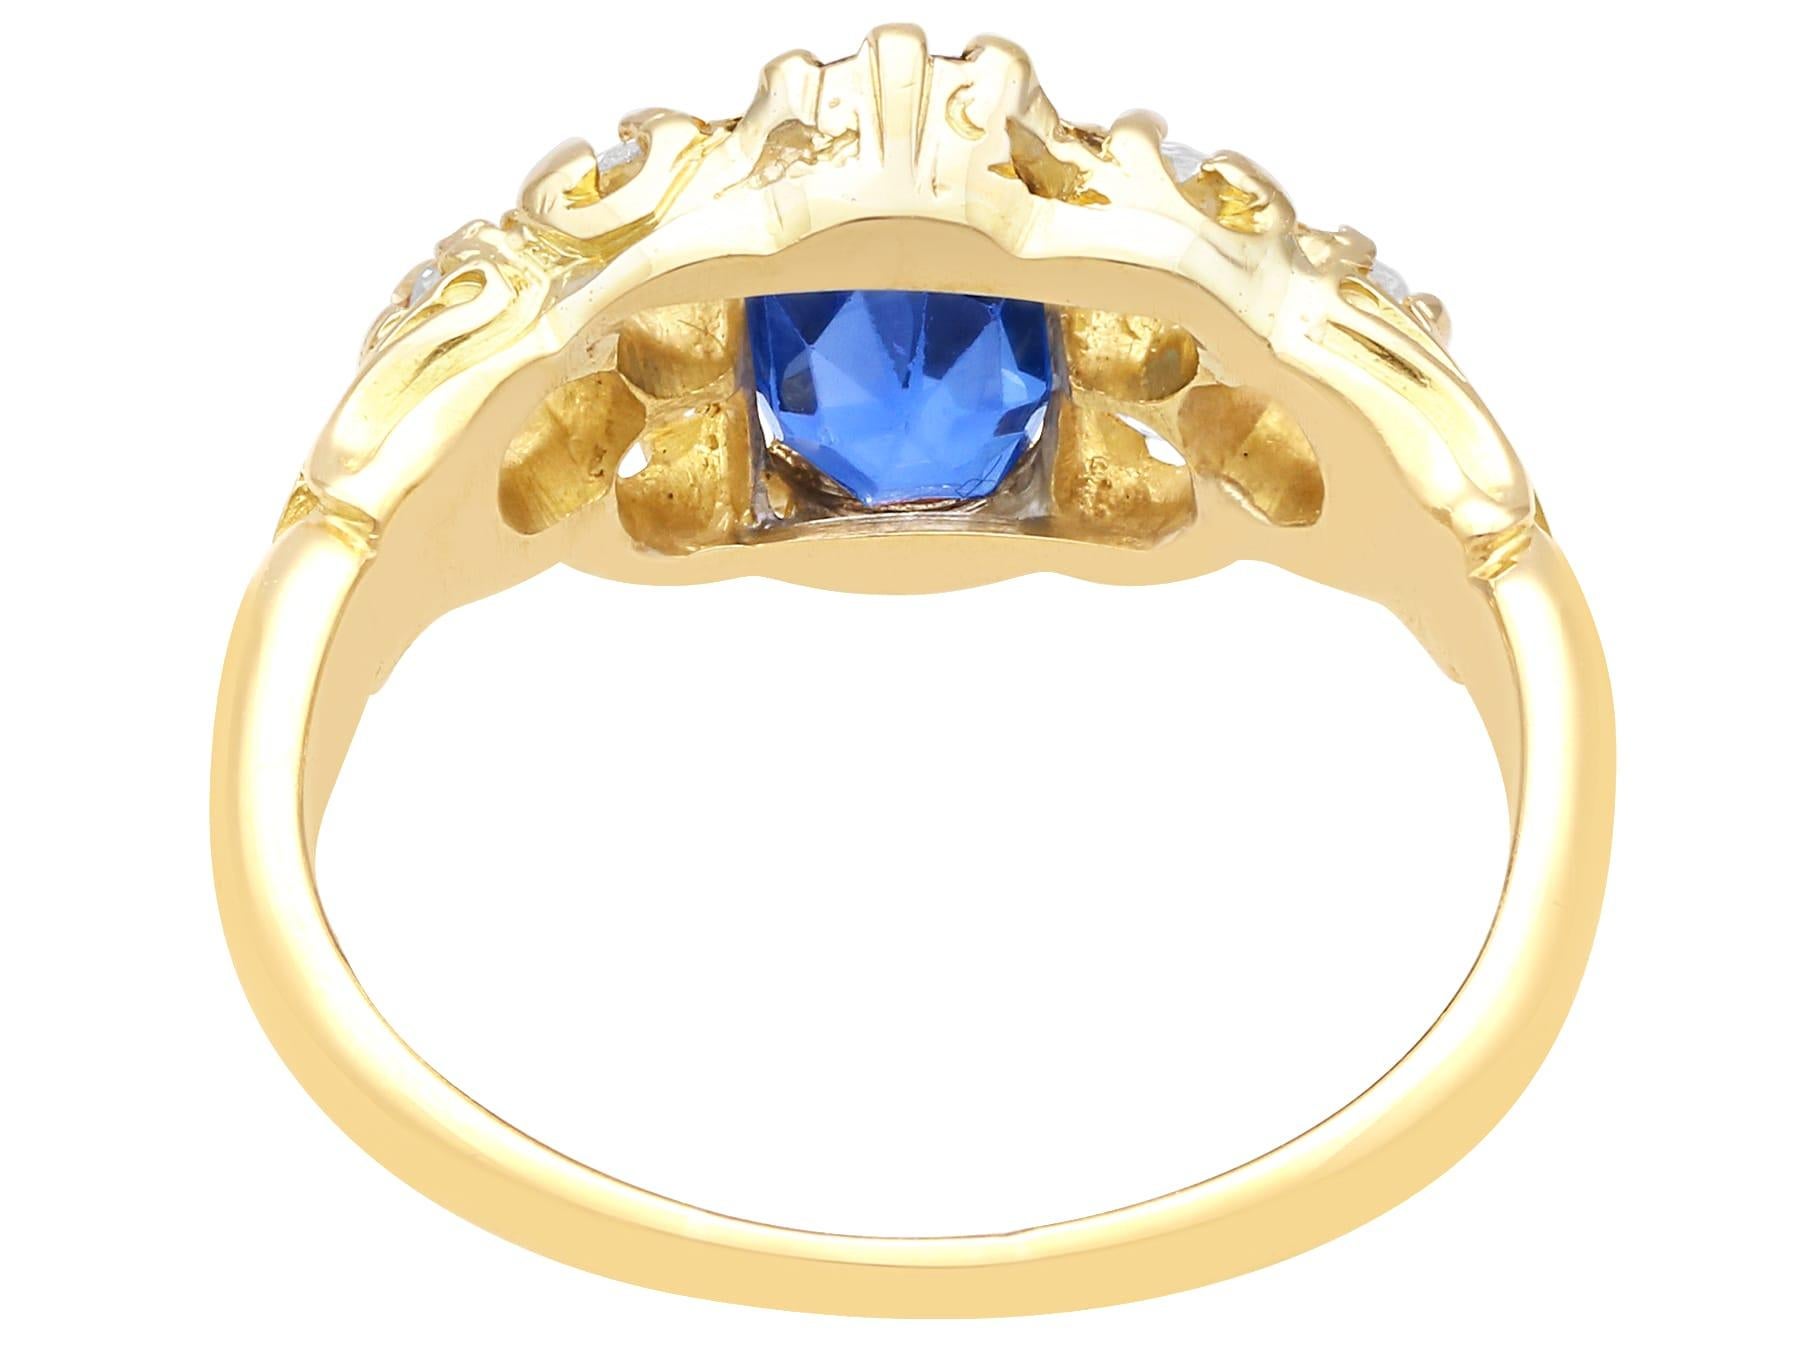 Antique Edwardian 2.30Ct Sapphire and 1.05ct Diamond 18k Yellow Gold Ring  In Excellent Condition For Sale In Jesmond, Newcastle Upon Tyne